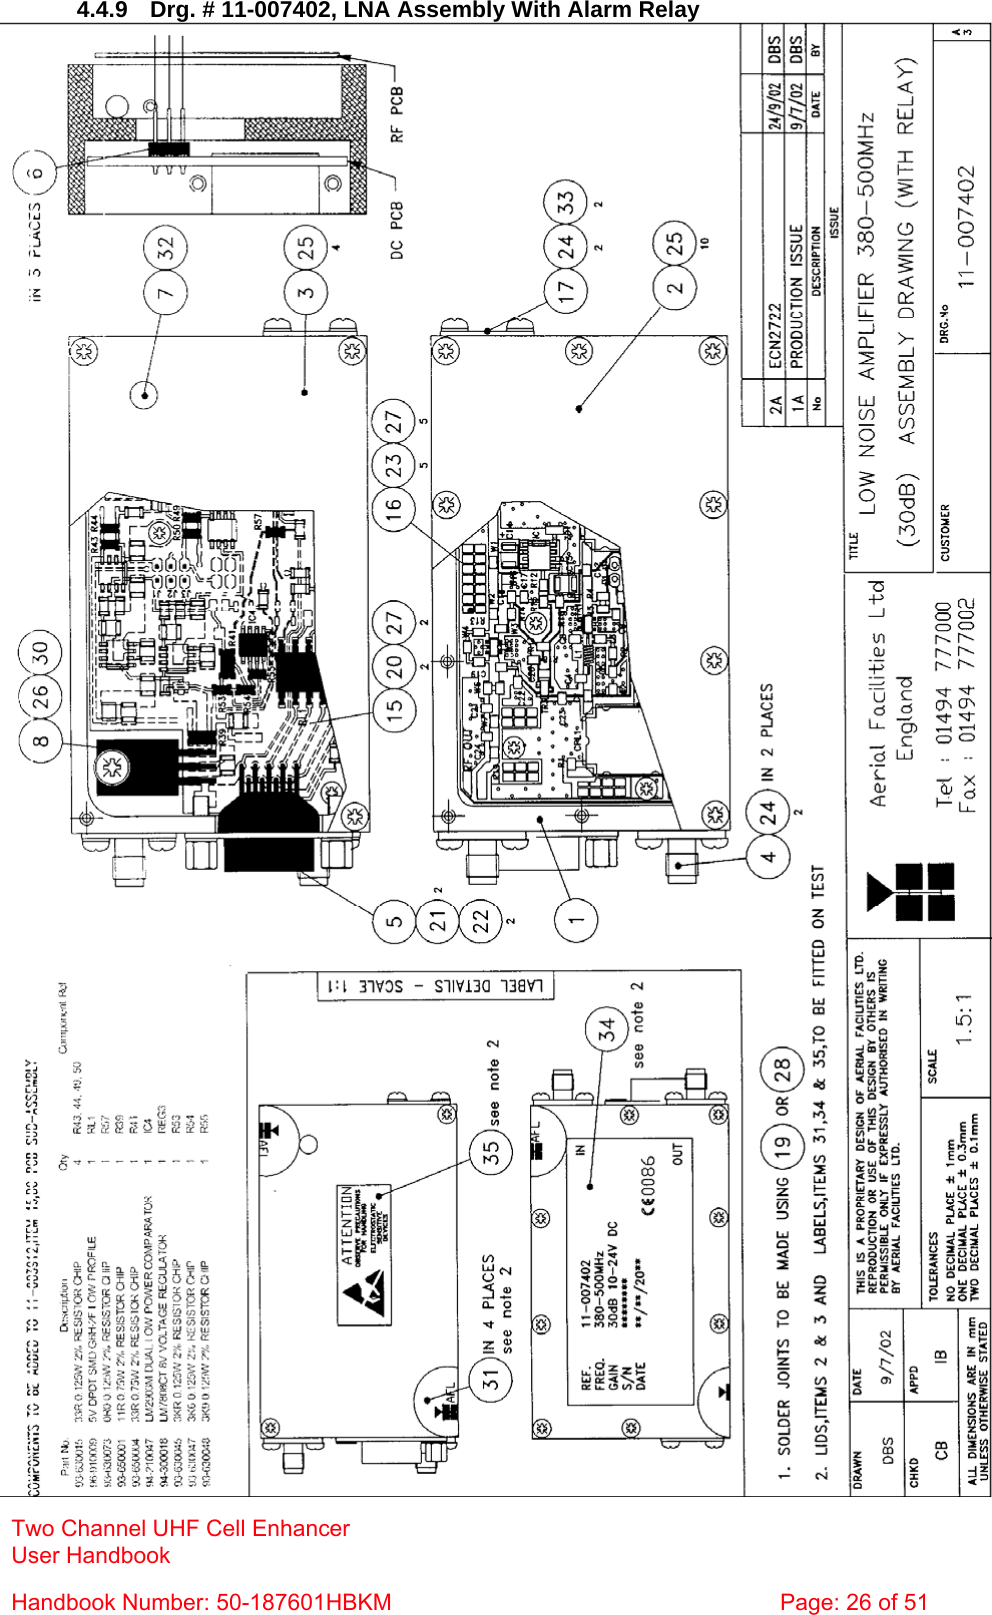  4.4.9  Drg. # 11-007402, LNA Assembly With Alarm Relay  Two Channel UHF Cell Enhancer User Handbook Handbook Number: 50-187601HBKM  Page: 26 of 51  